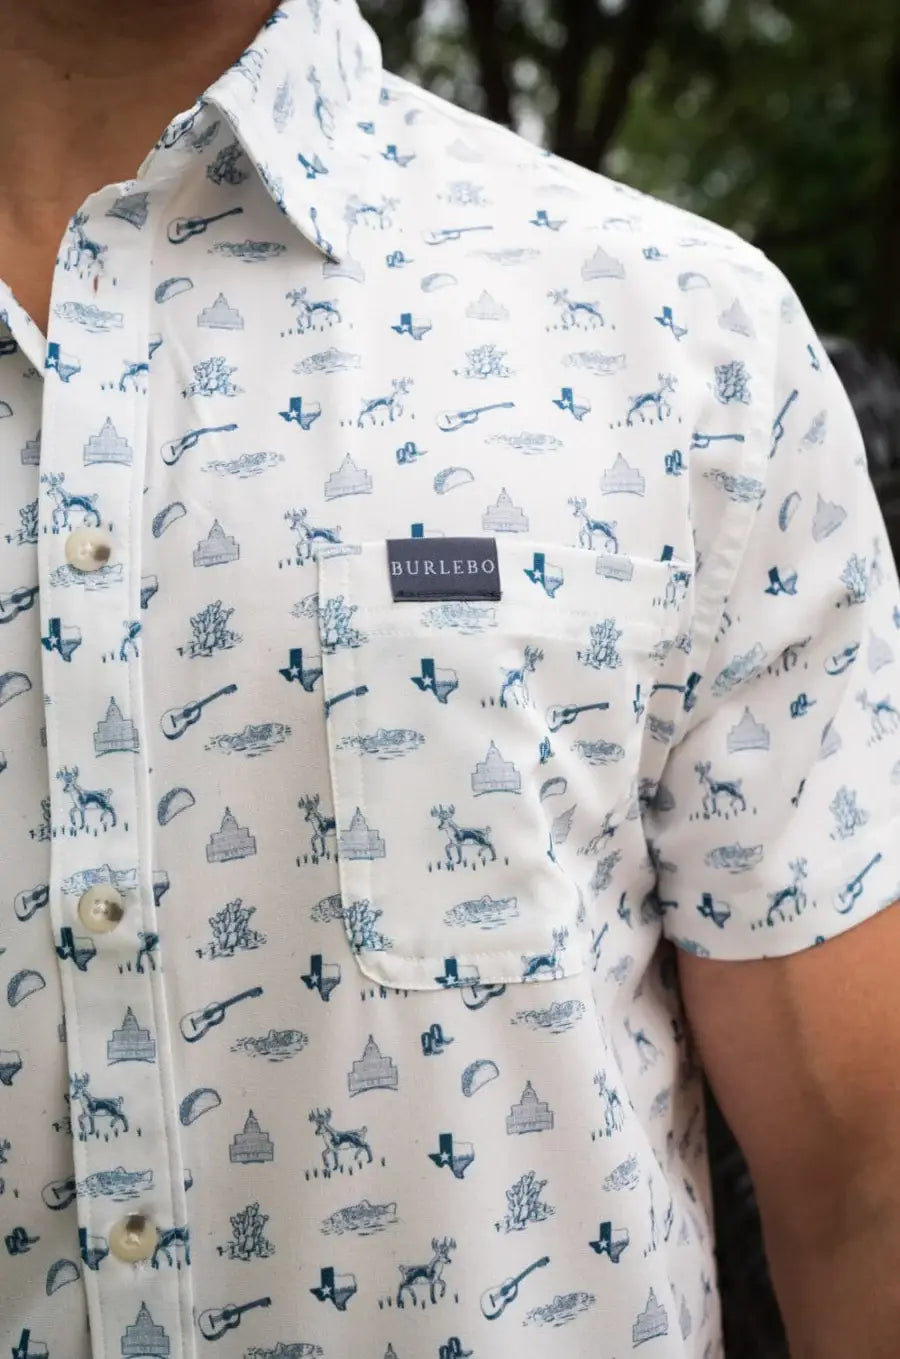 close-up of shirt patterned with southern texas landmarks